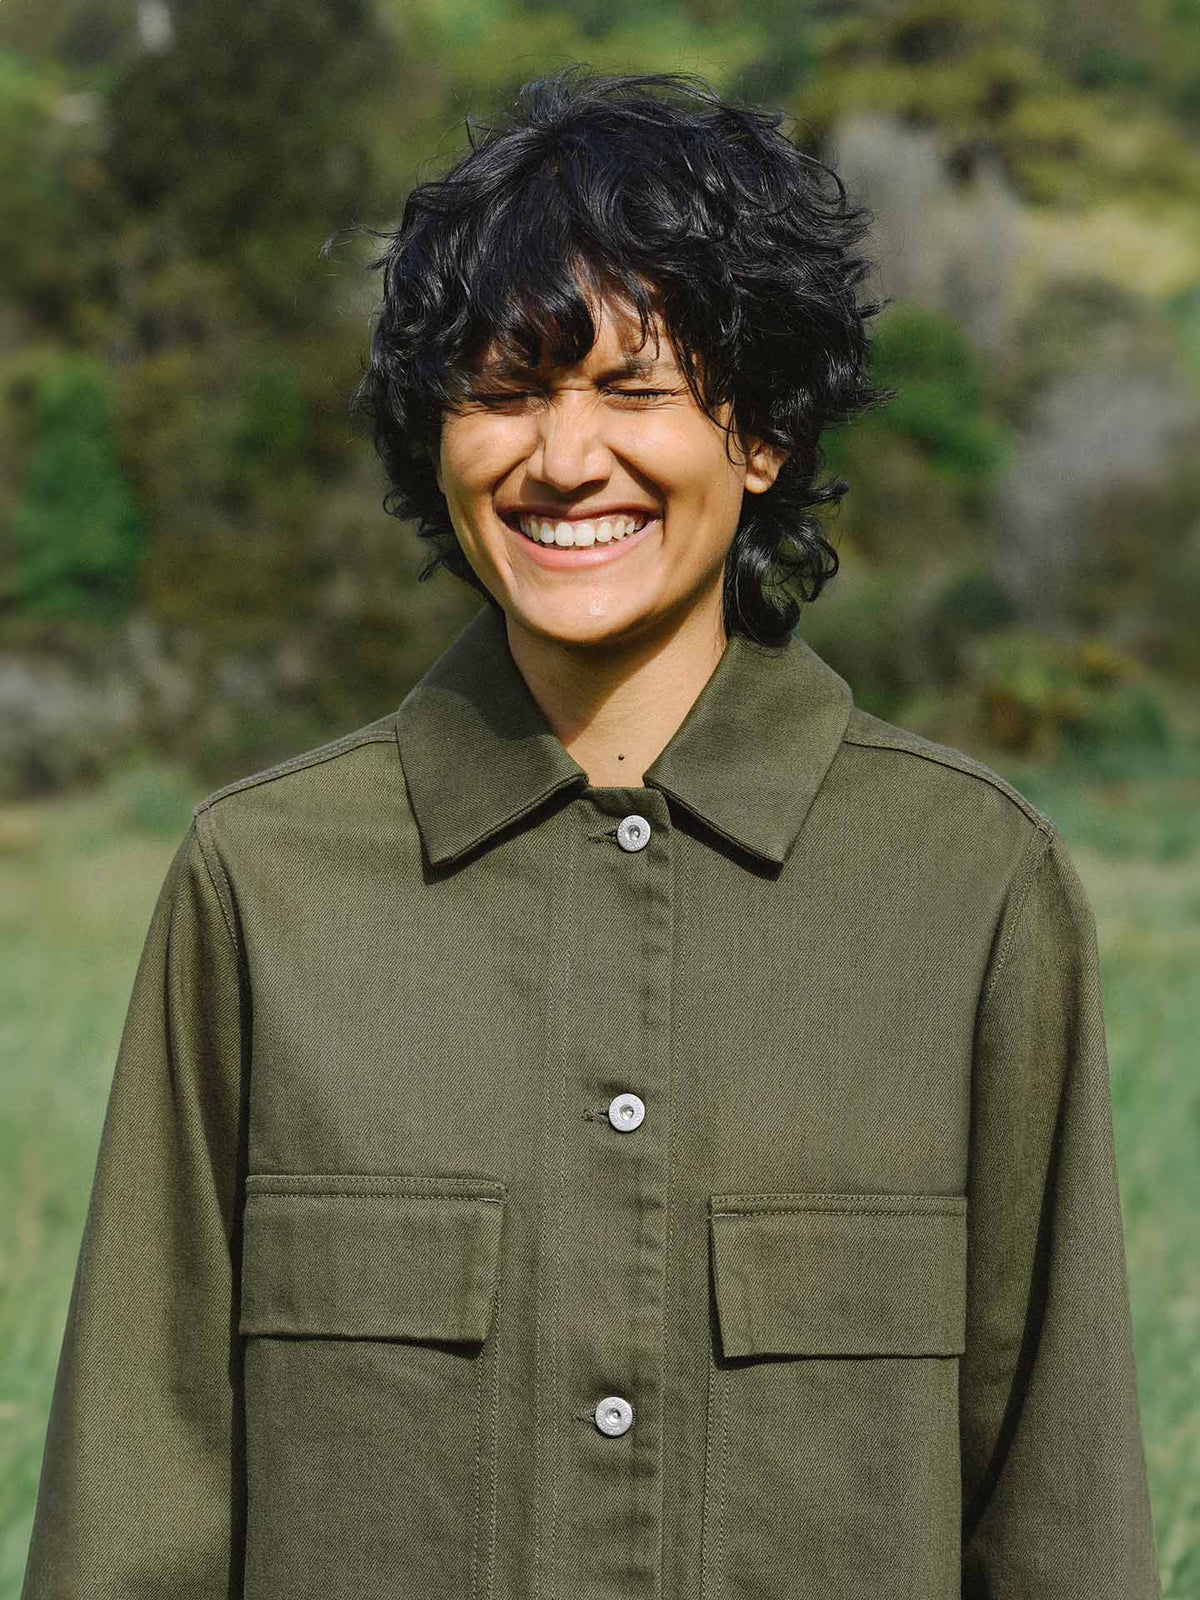 A person with curly black hair smiling outdoors while wearing a Mirror Jacket – Khaki Denim that fits perfectly according to their measurements from Kowtow.